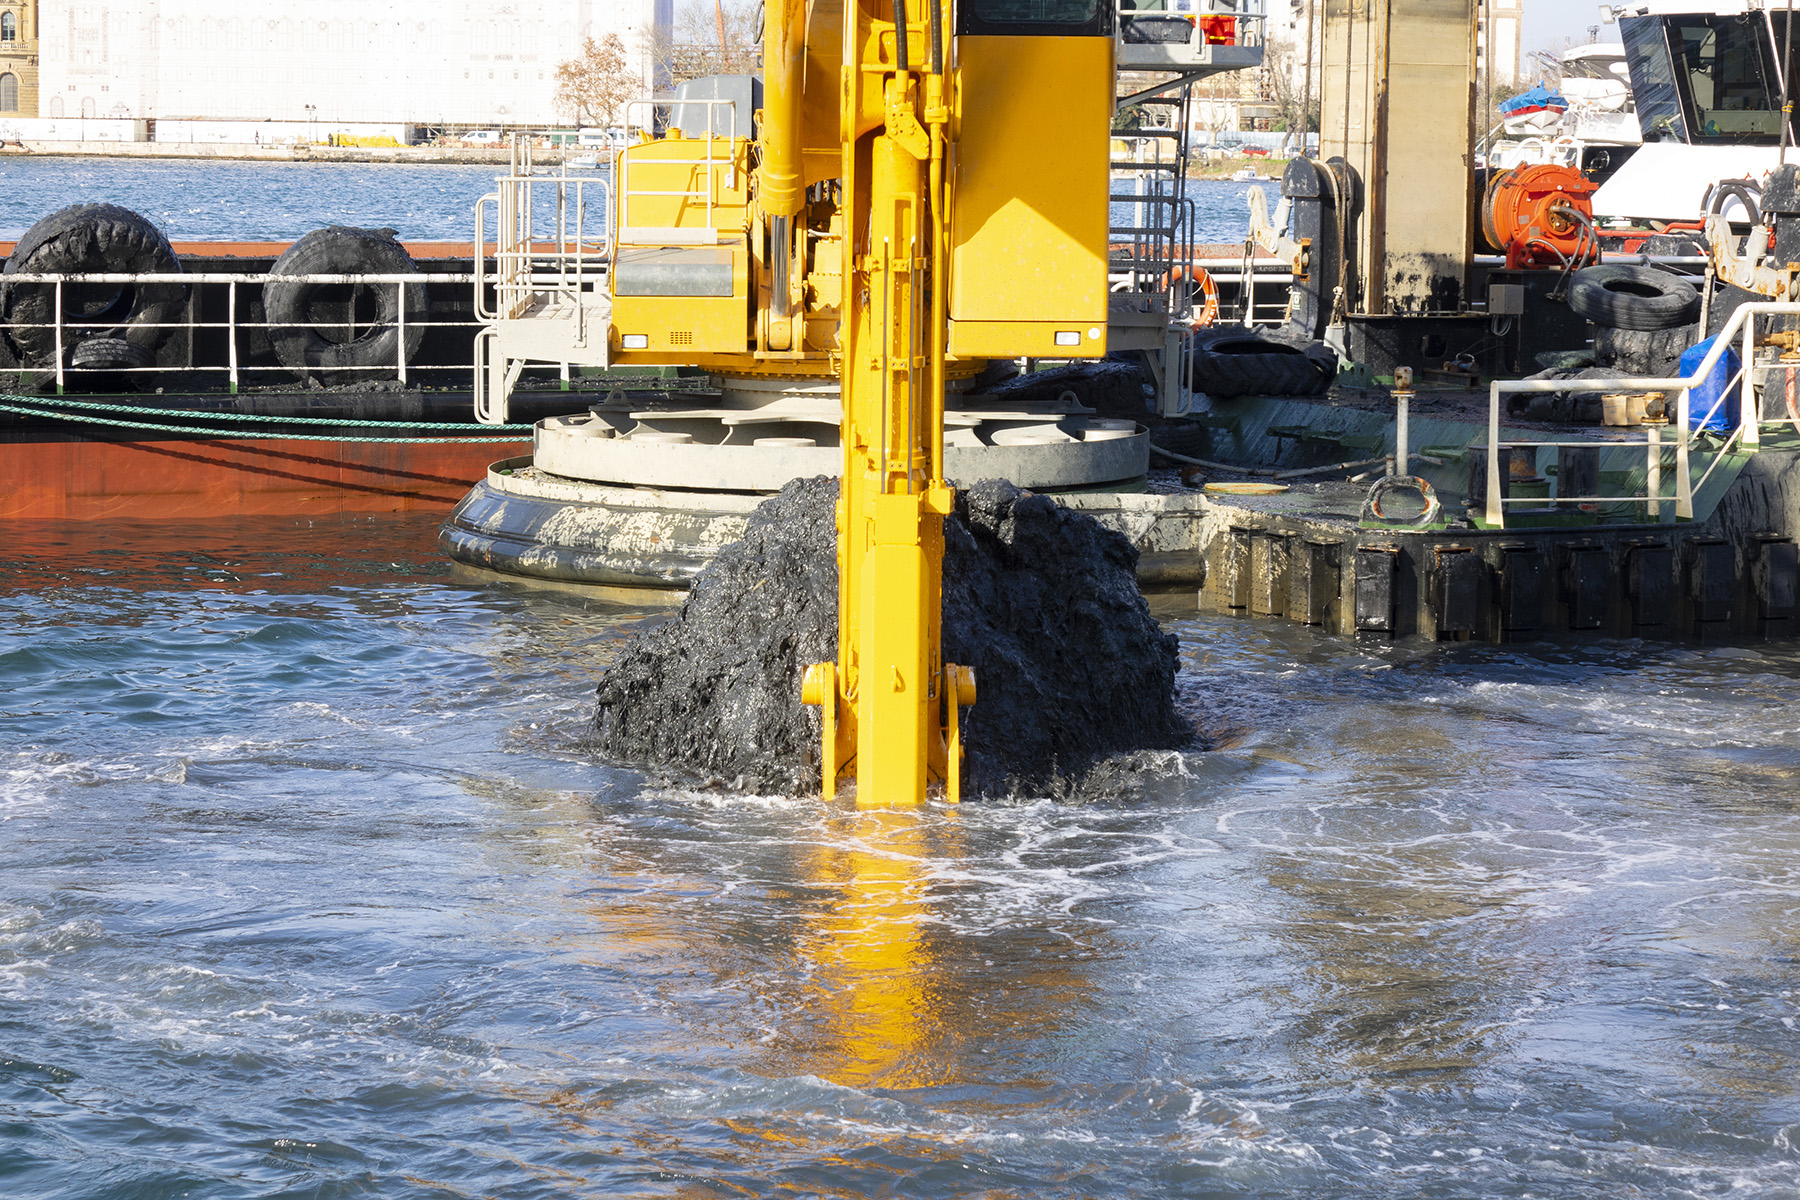 Sediment is being dredged from a body of water by large equipment. 